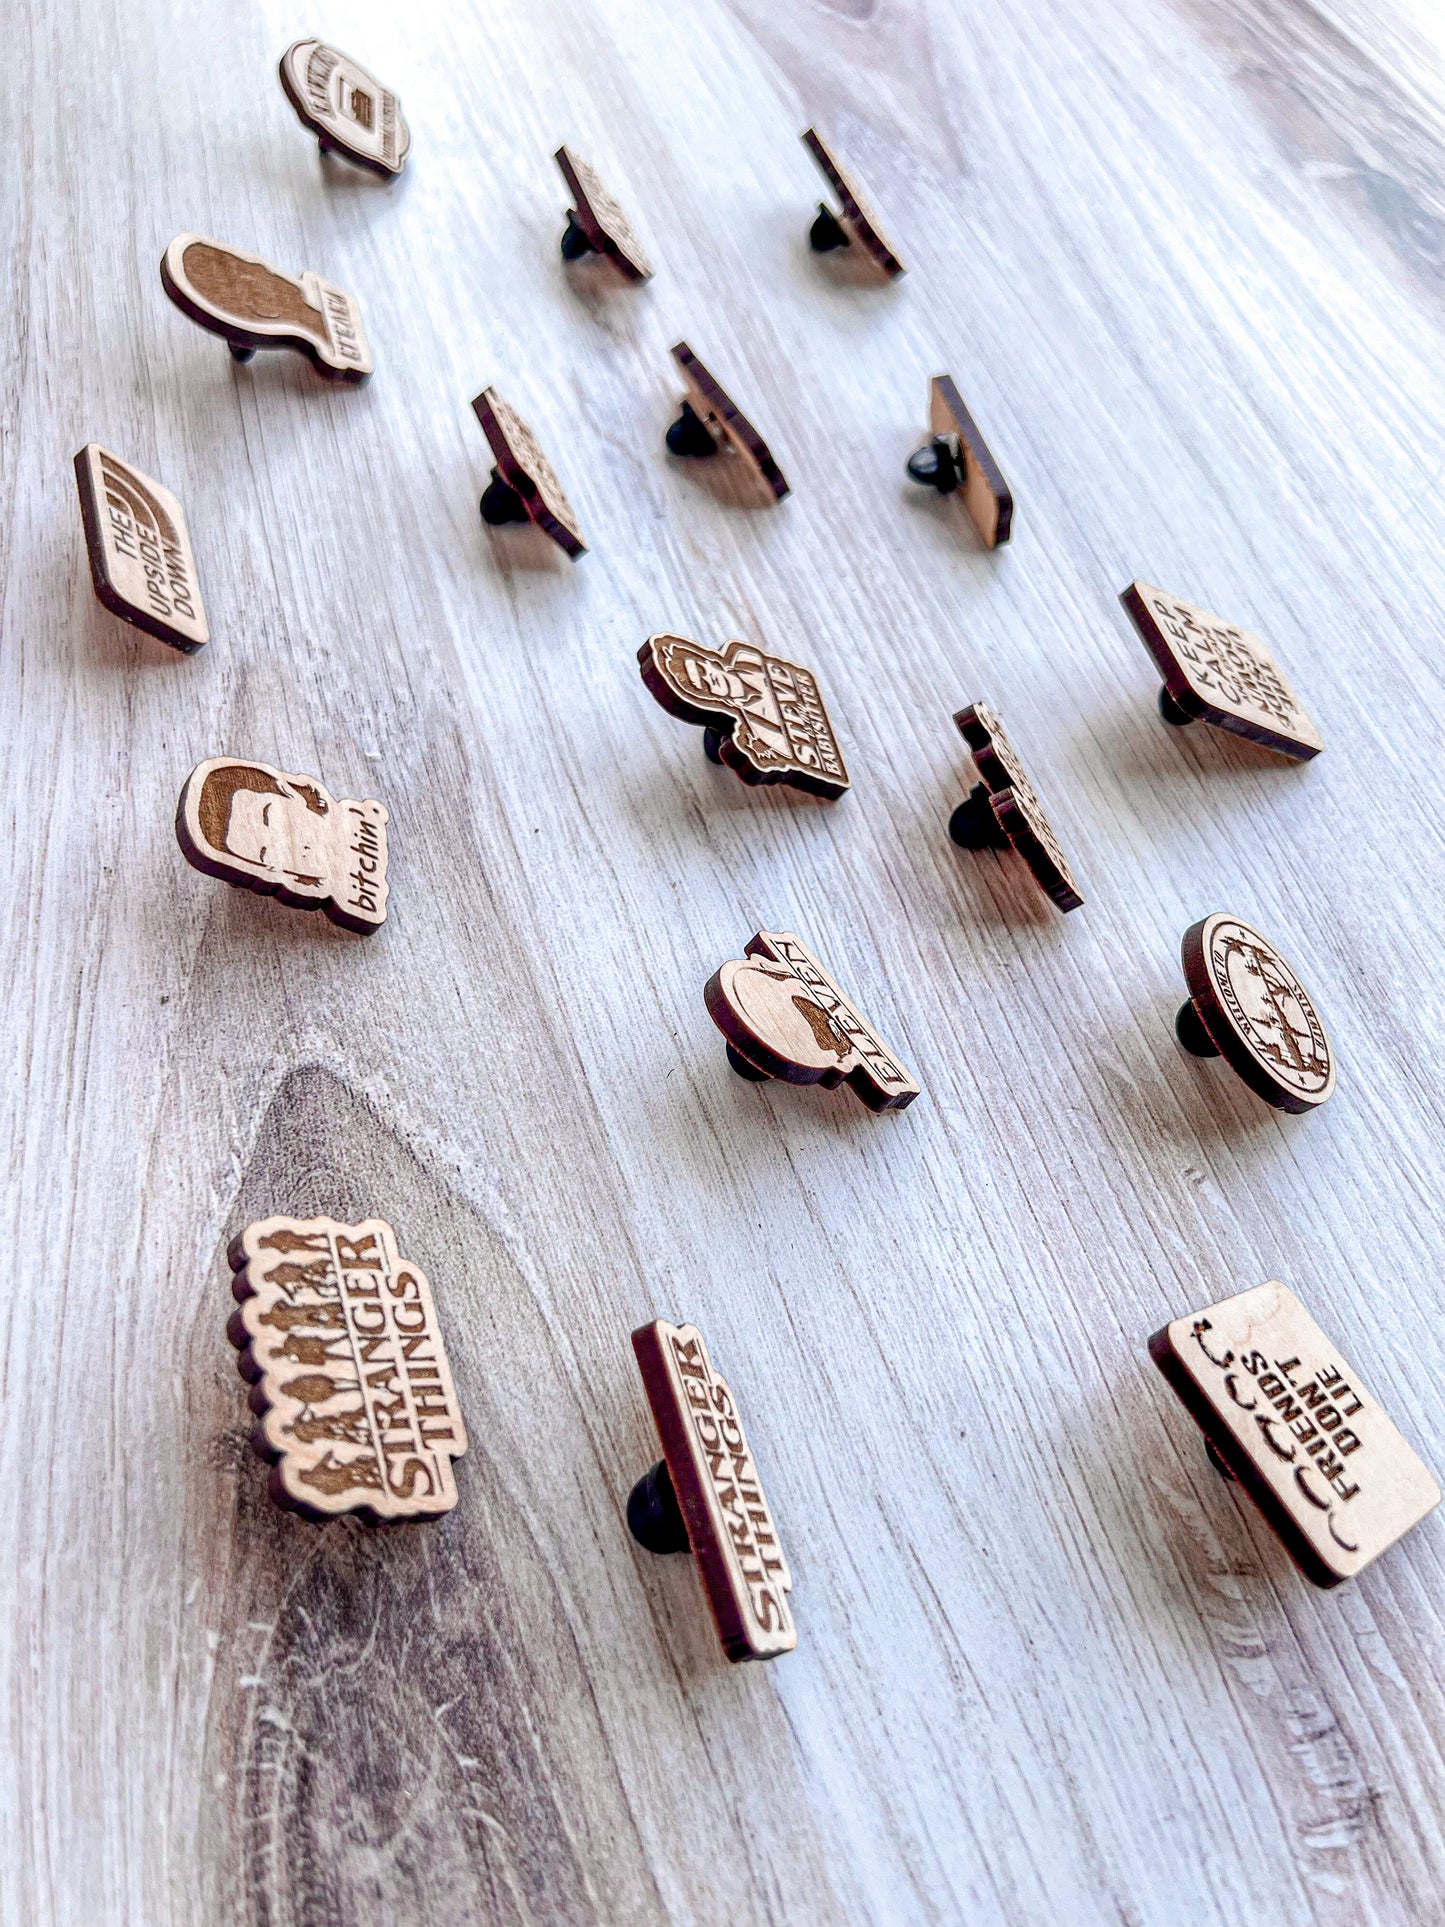 The Upside Down | Wooden Pin